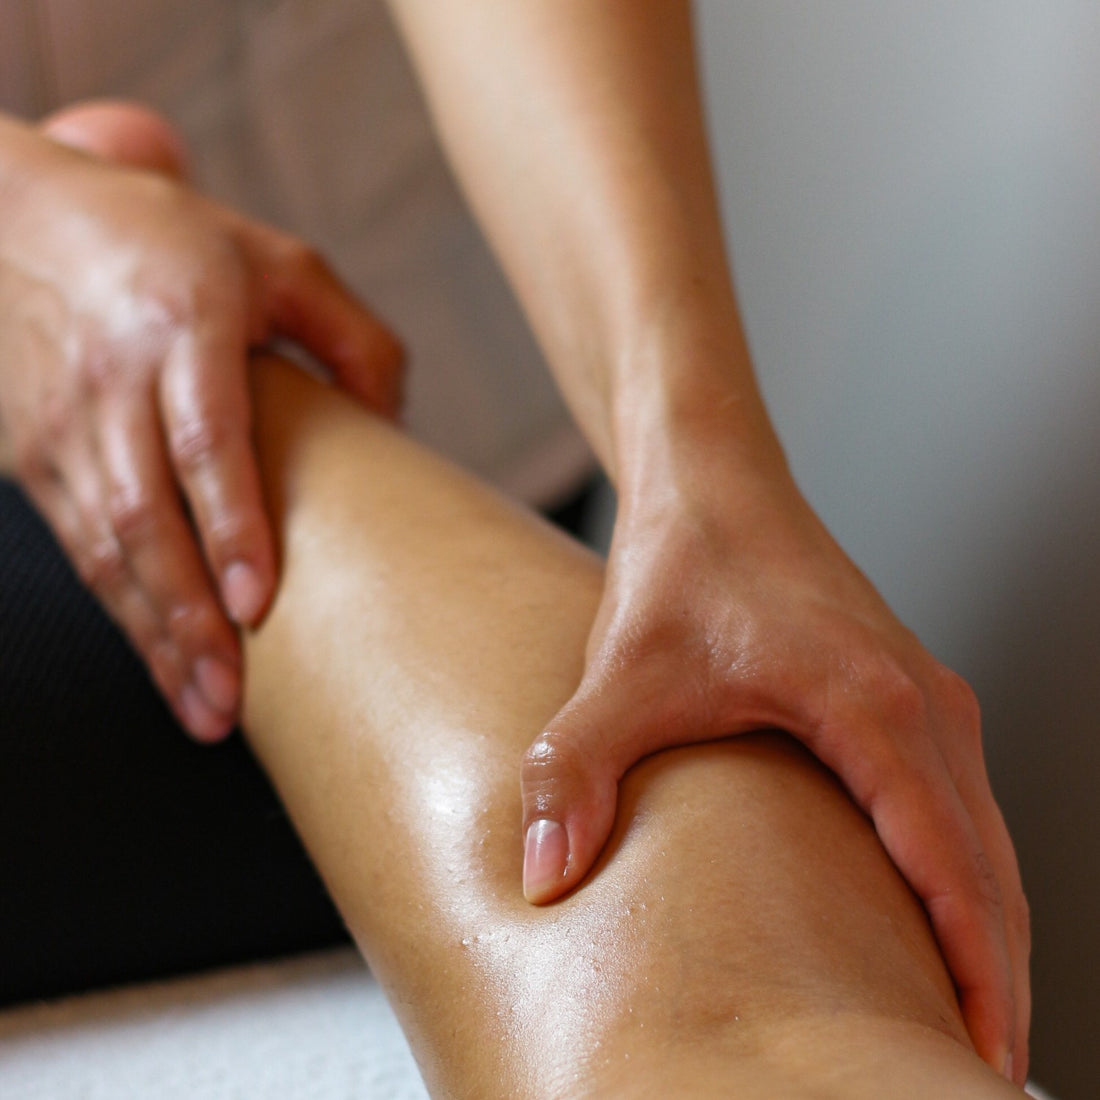 This looks good!: DEEP LEG AND HIP MASSAGE FOR PAIN